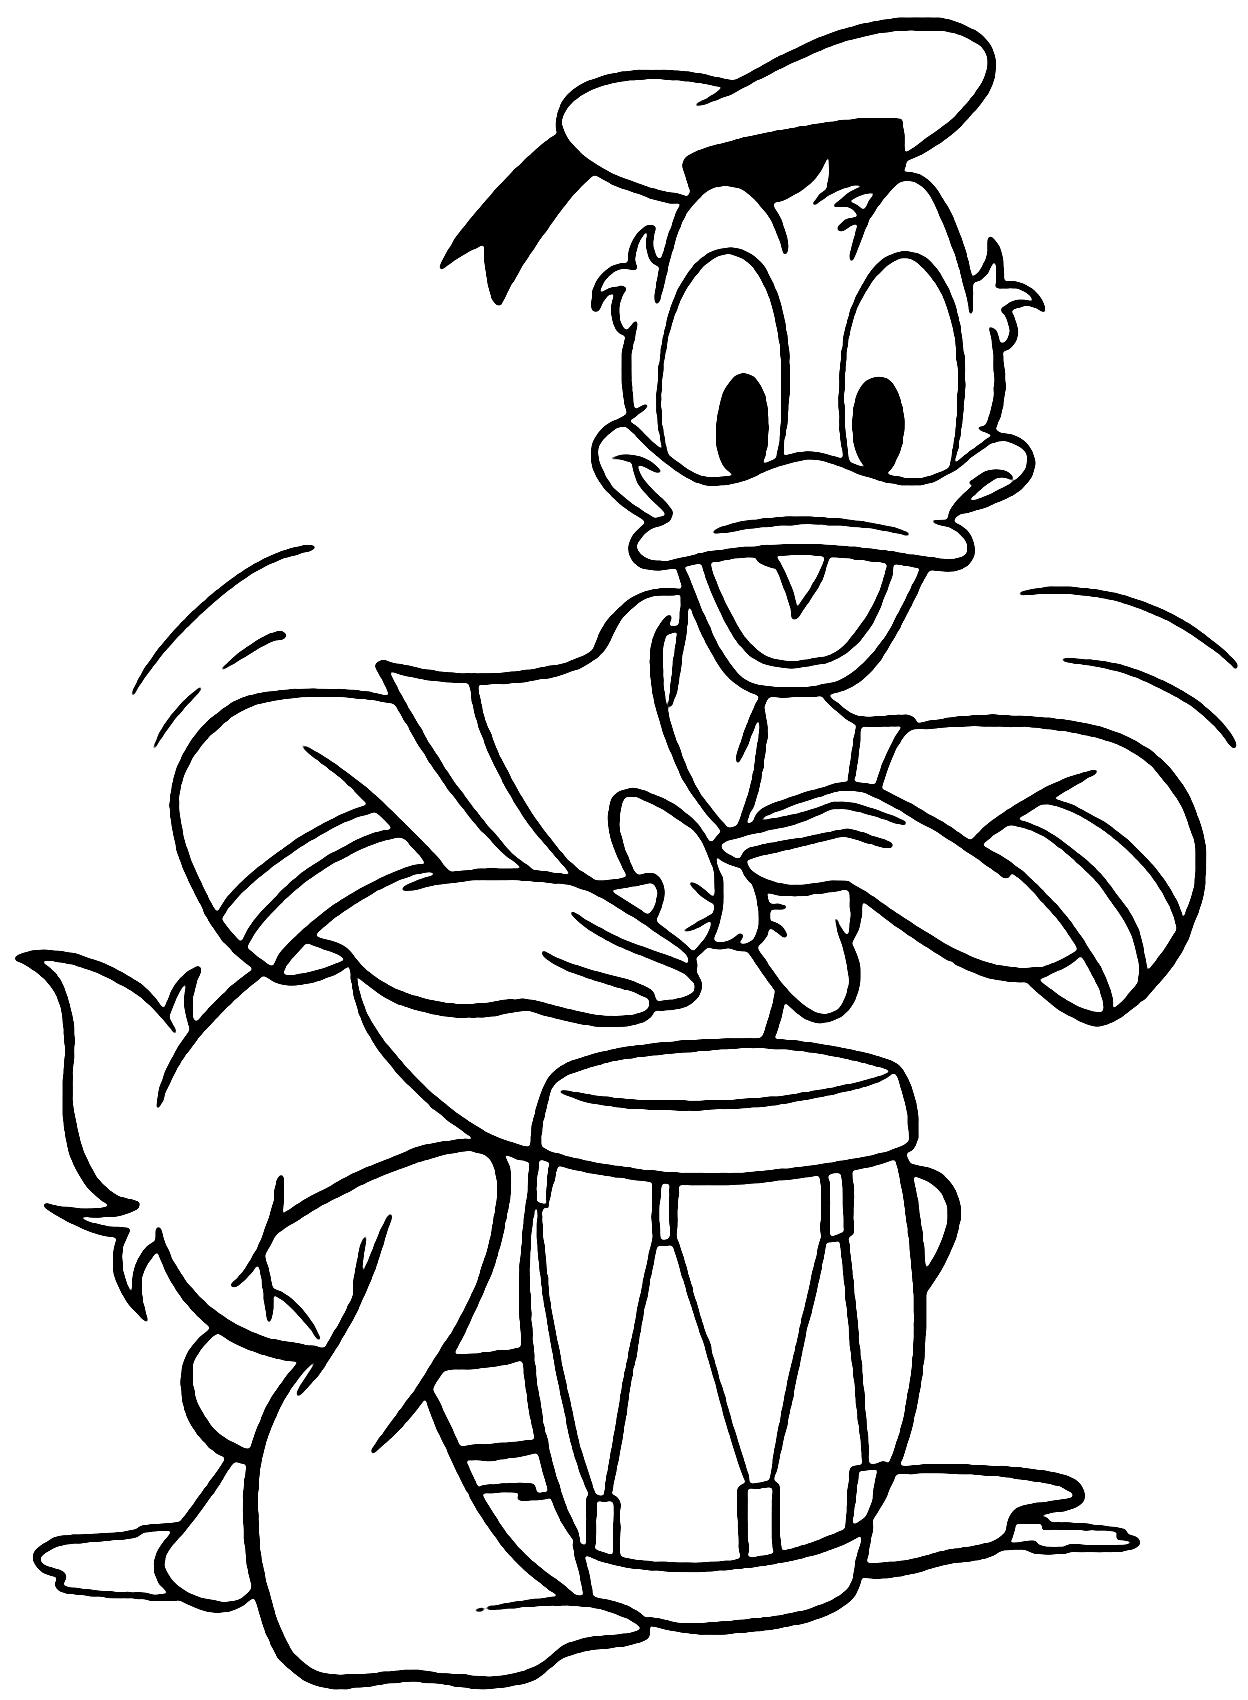 Happy Donald Duck coloring pages, Drums